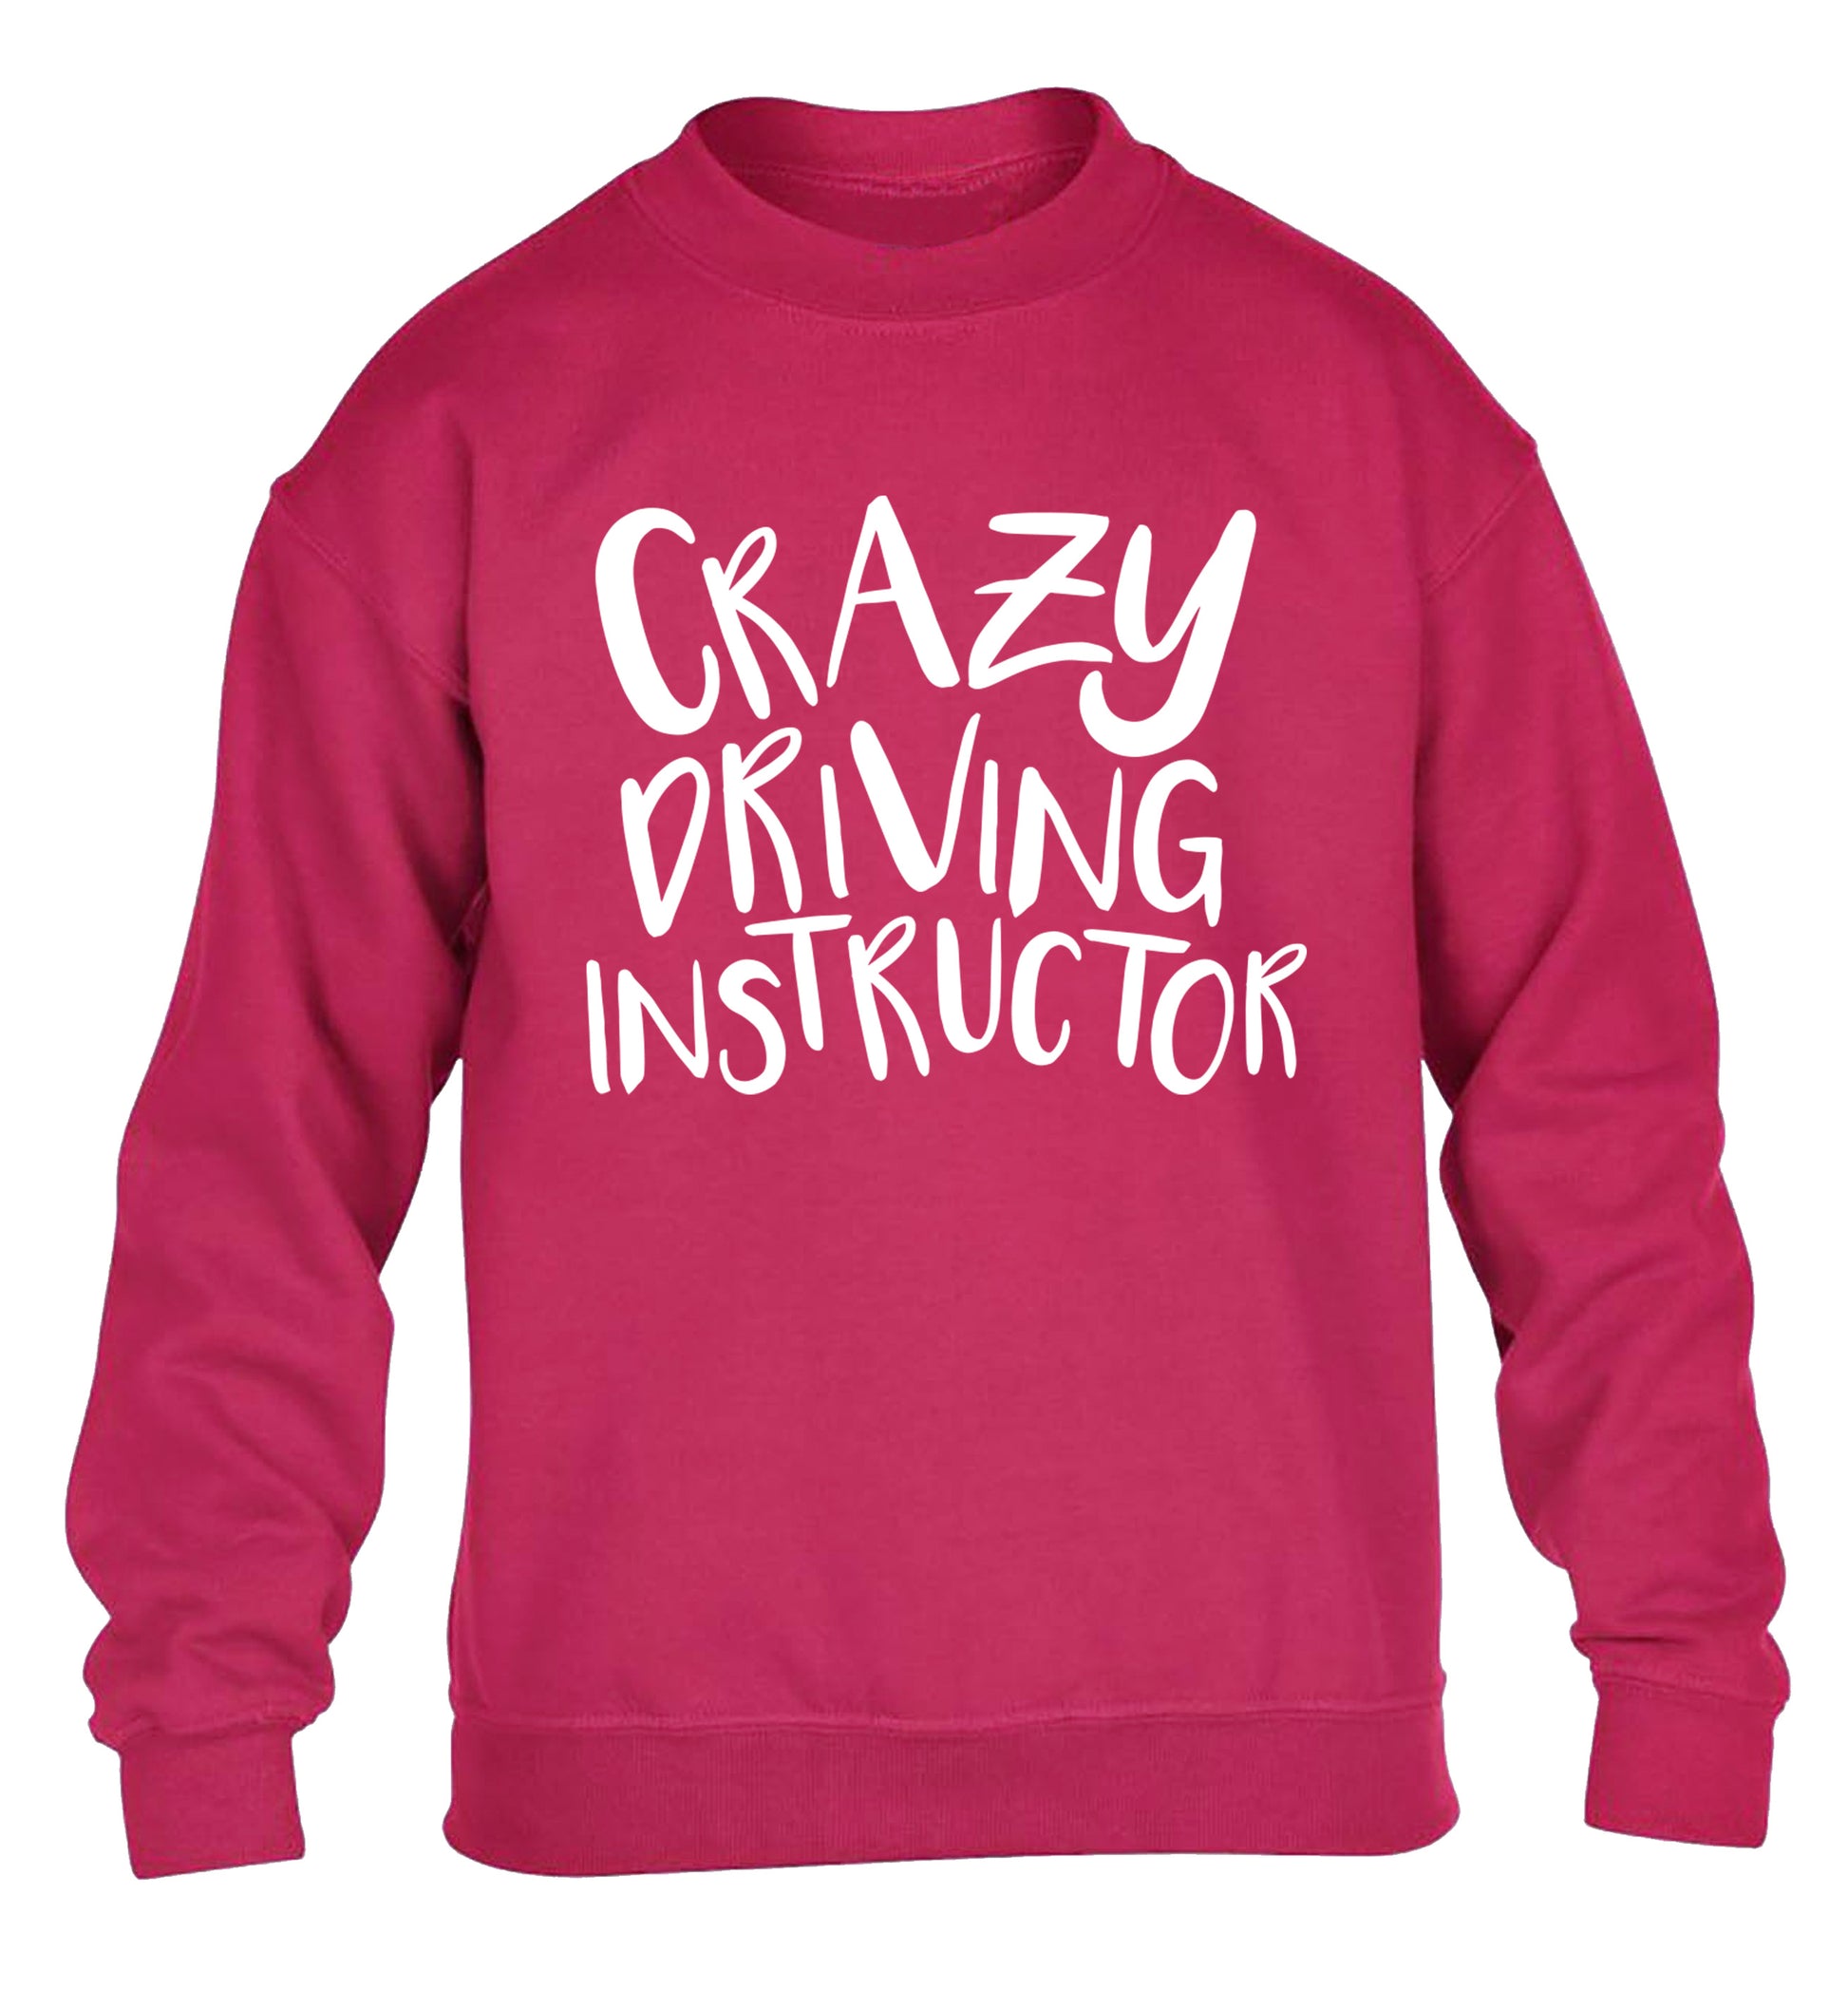 Crazy driving instructor children's pink sweater 12-13 Years